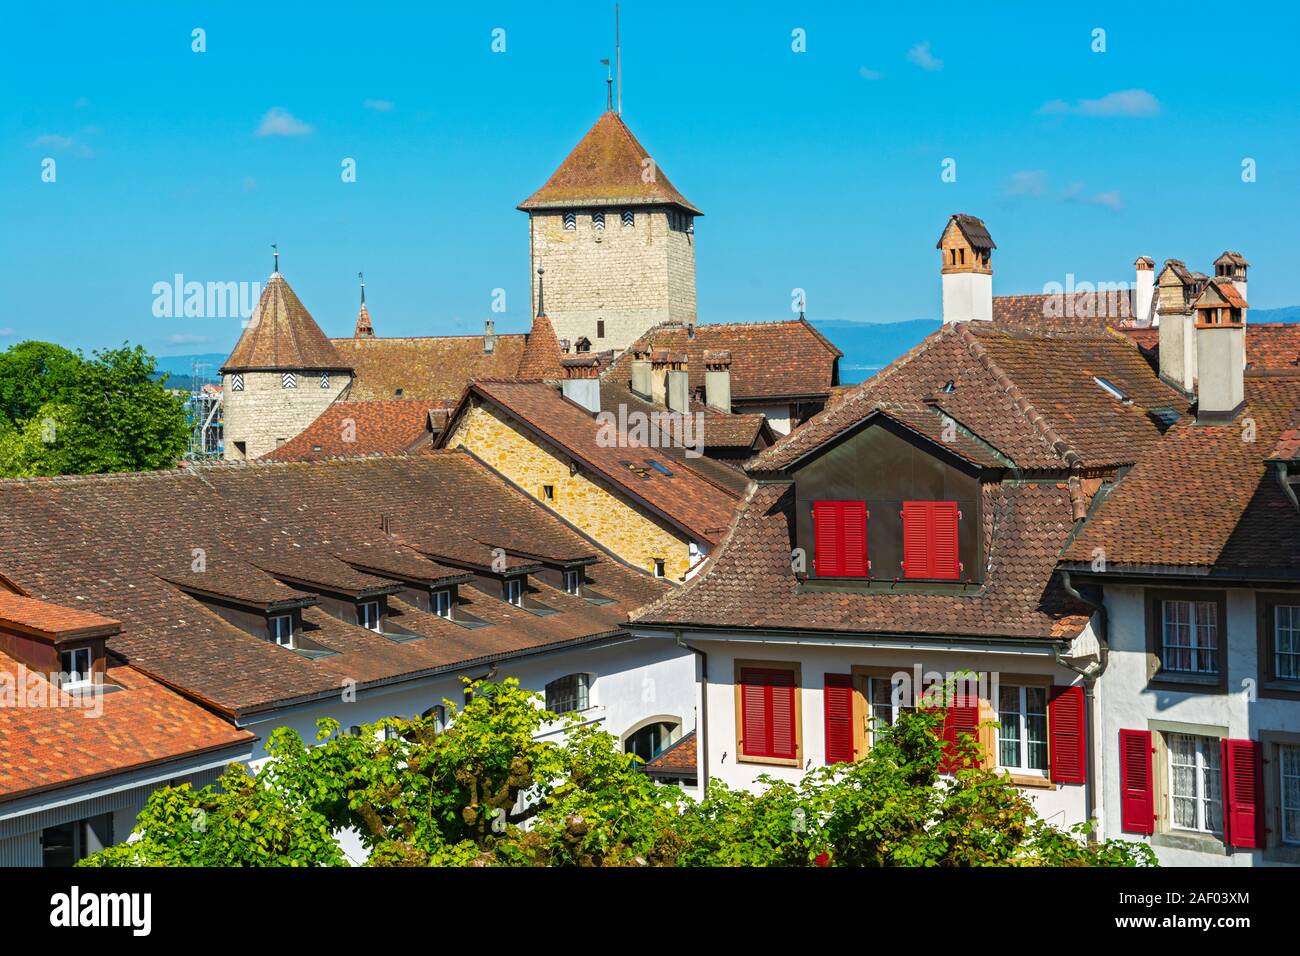 Switzerland, Fribourg Canton, Murten in German, Morat in French, view from Town Rampart Wall, Castle tower Stock Photo